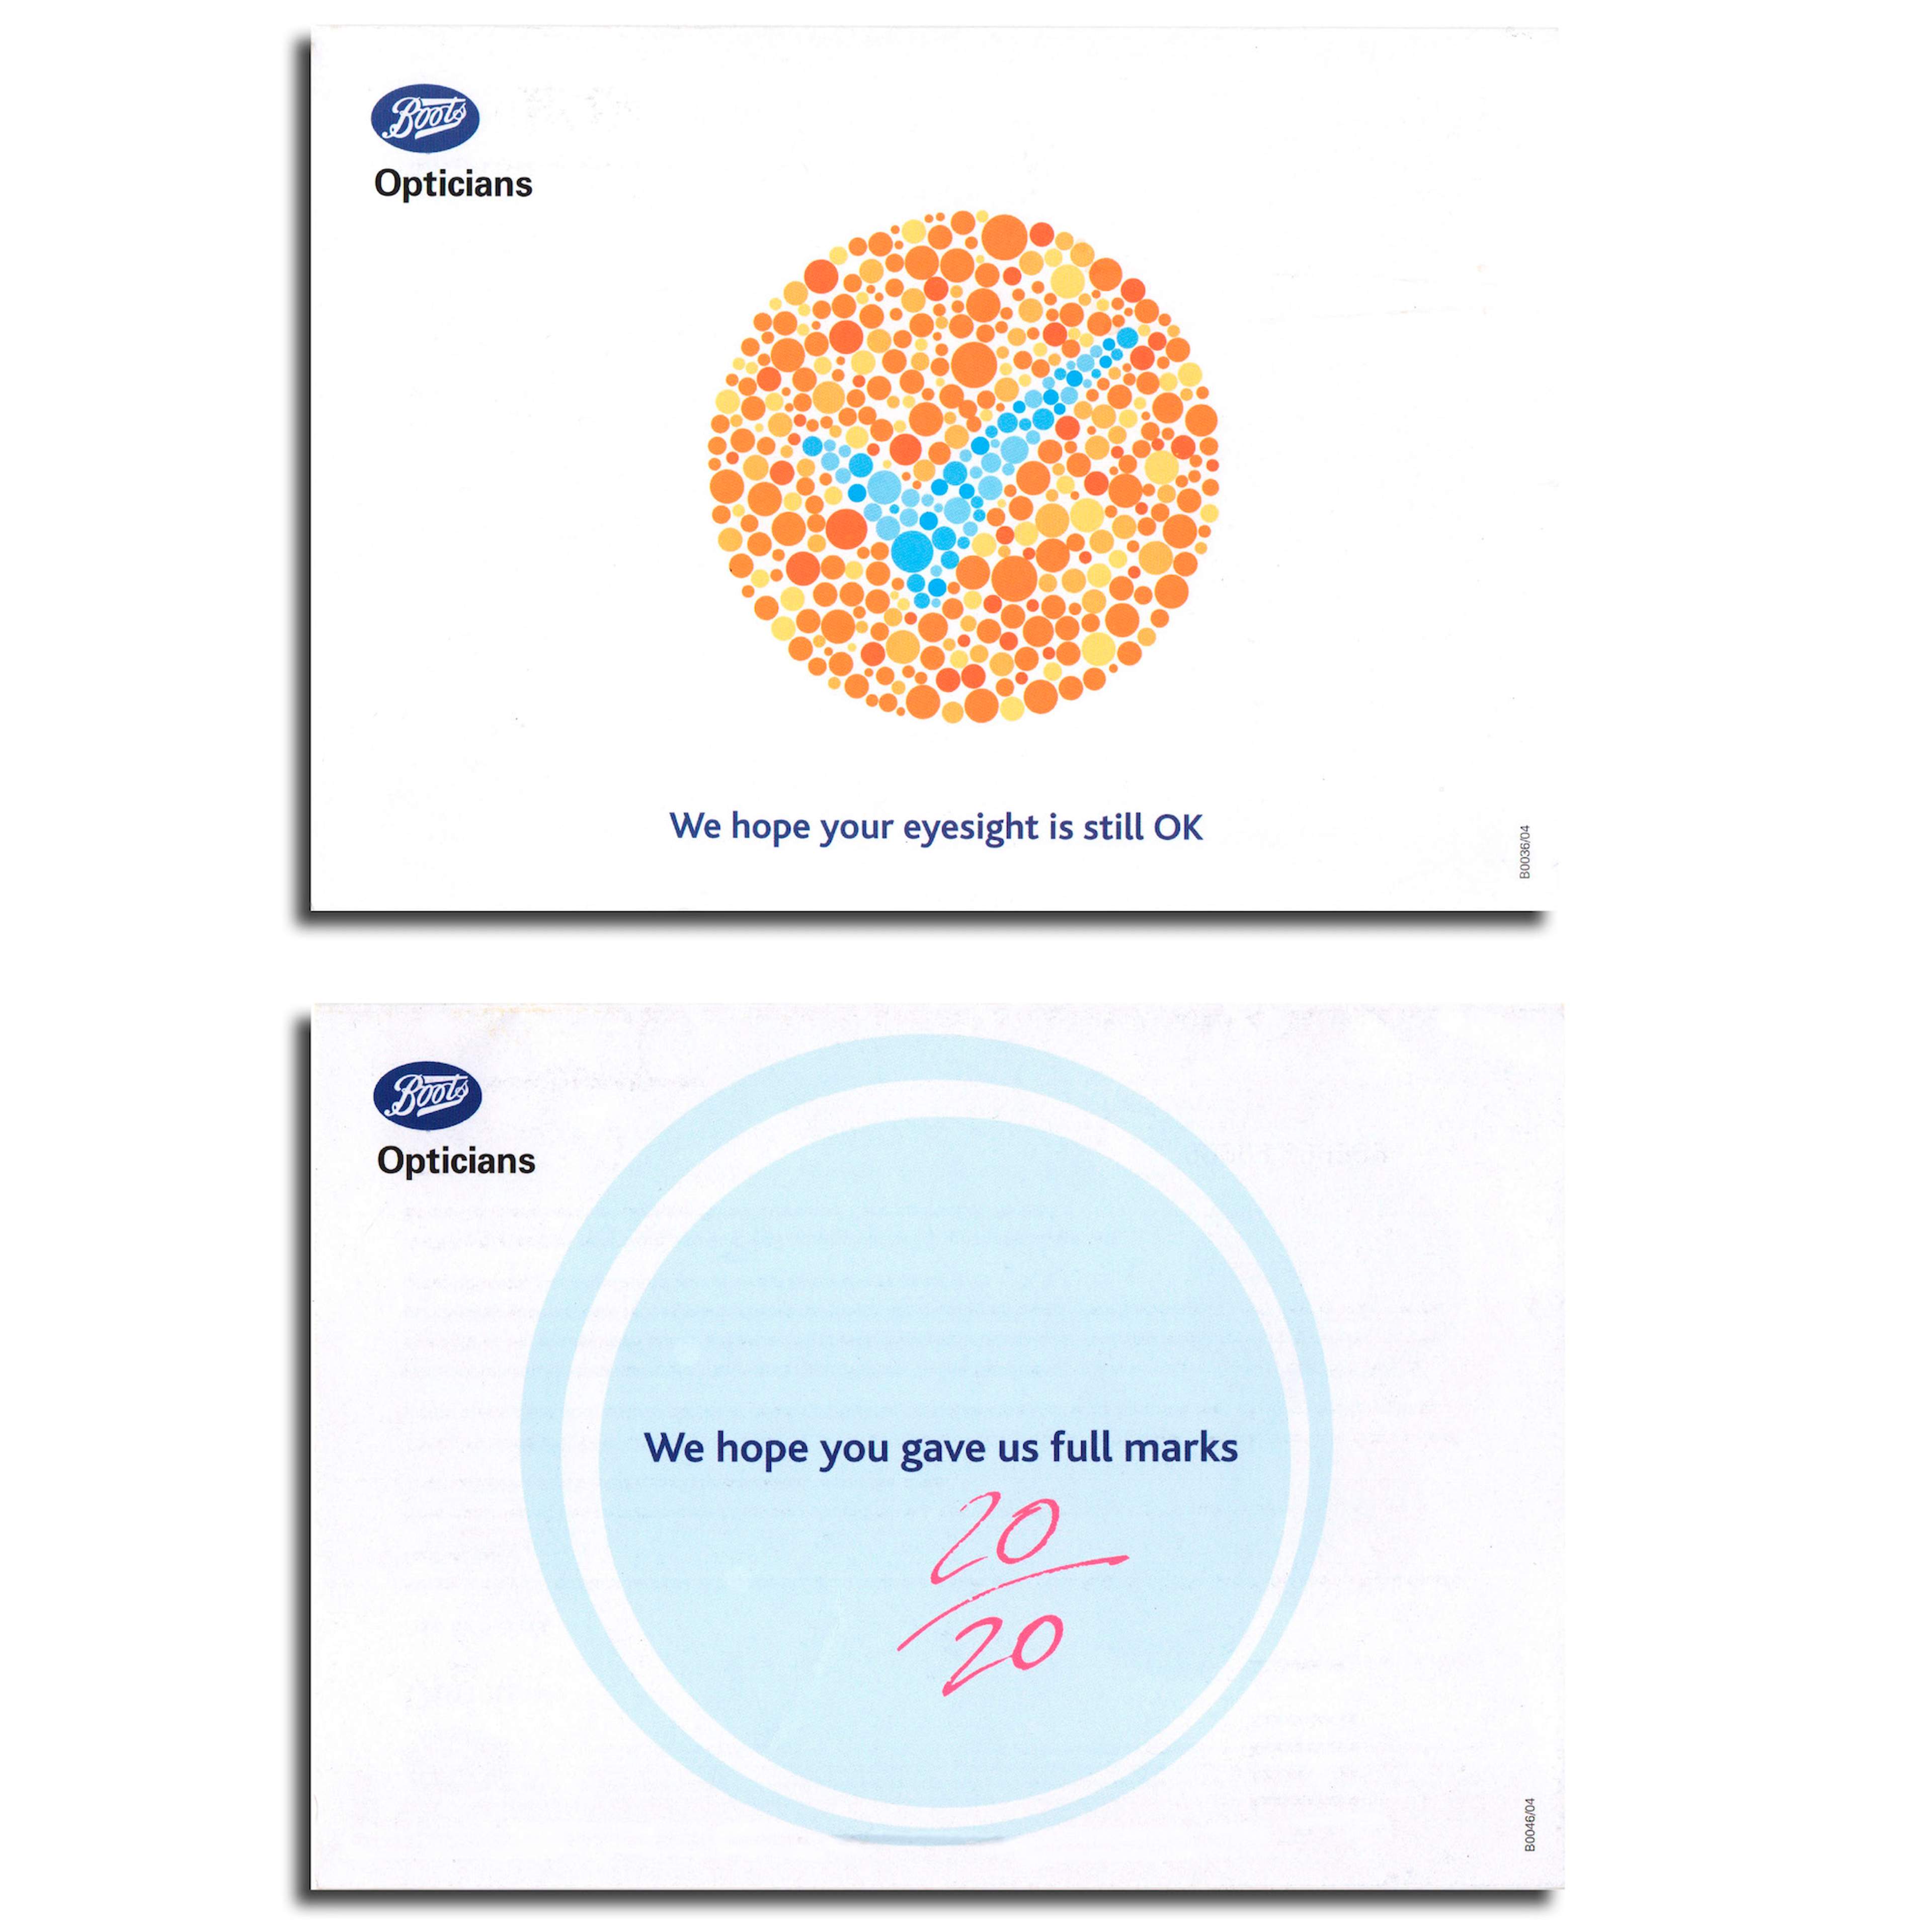 Boots Optician direct mail pieces: one using Ishihara colour test, and the other using 20:20 vision test.